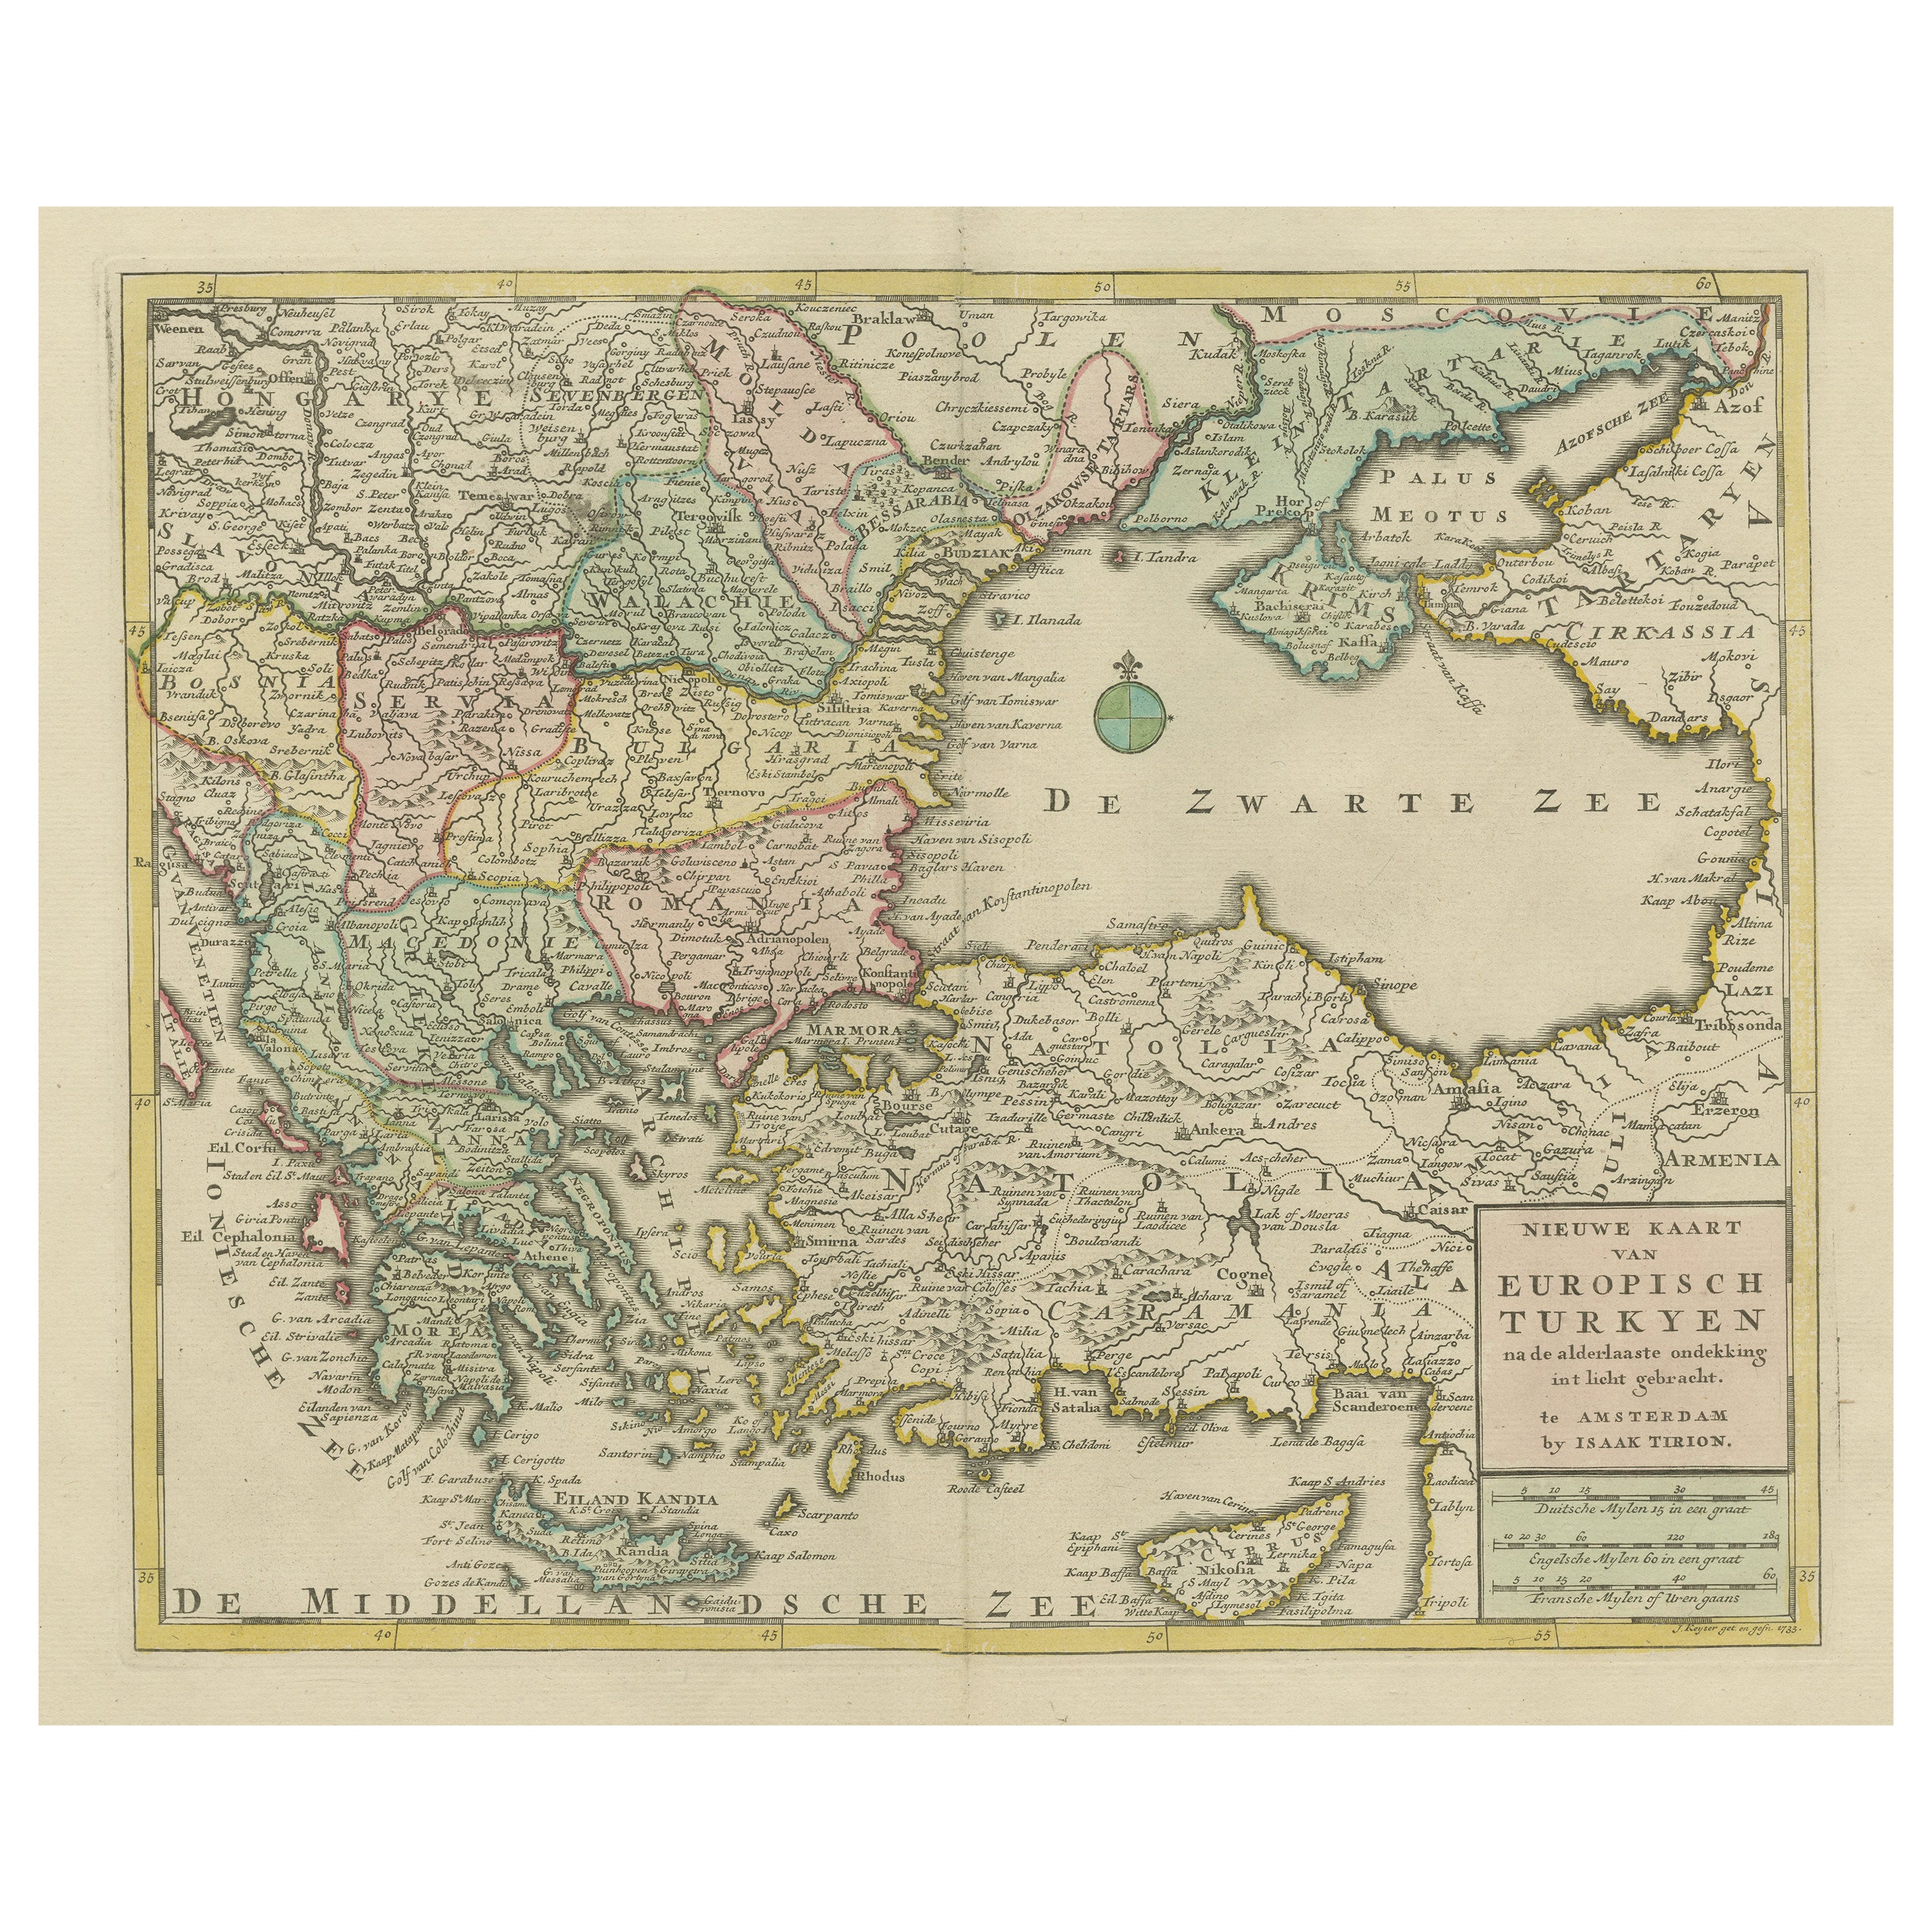 Antique Map of Greece, Turkey and surroundings with original coloring